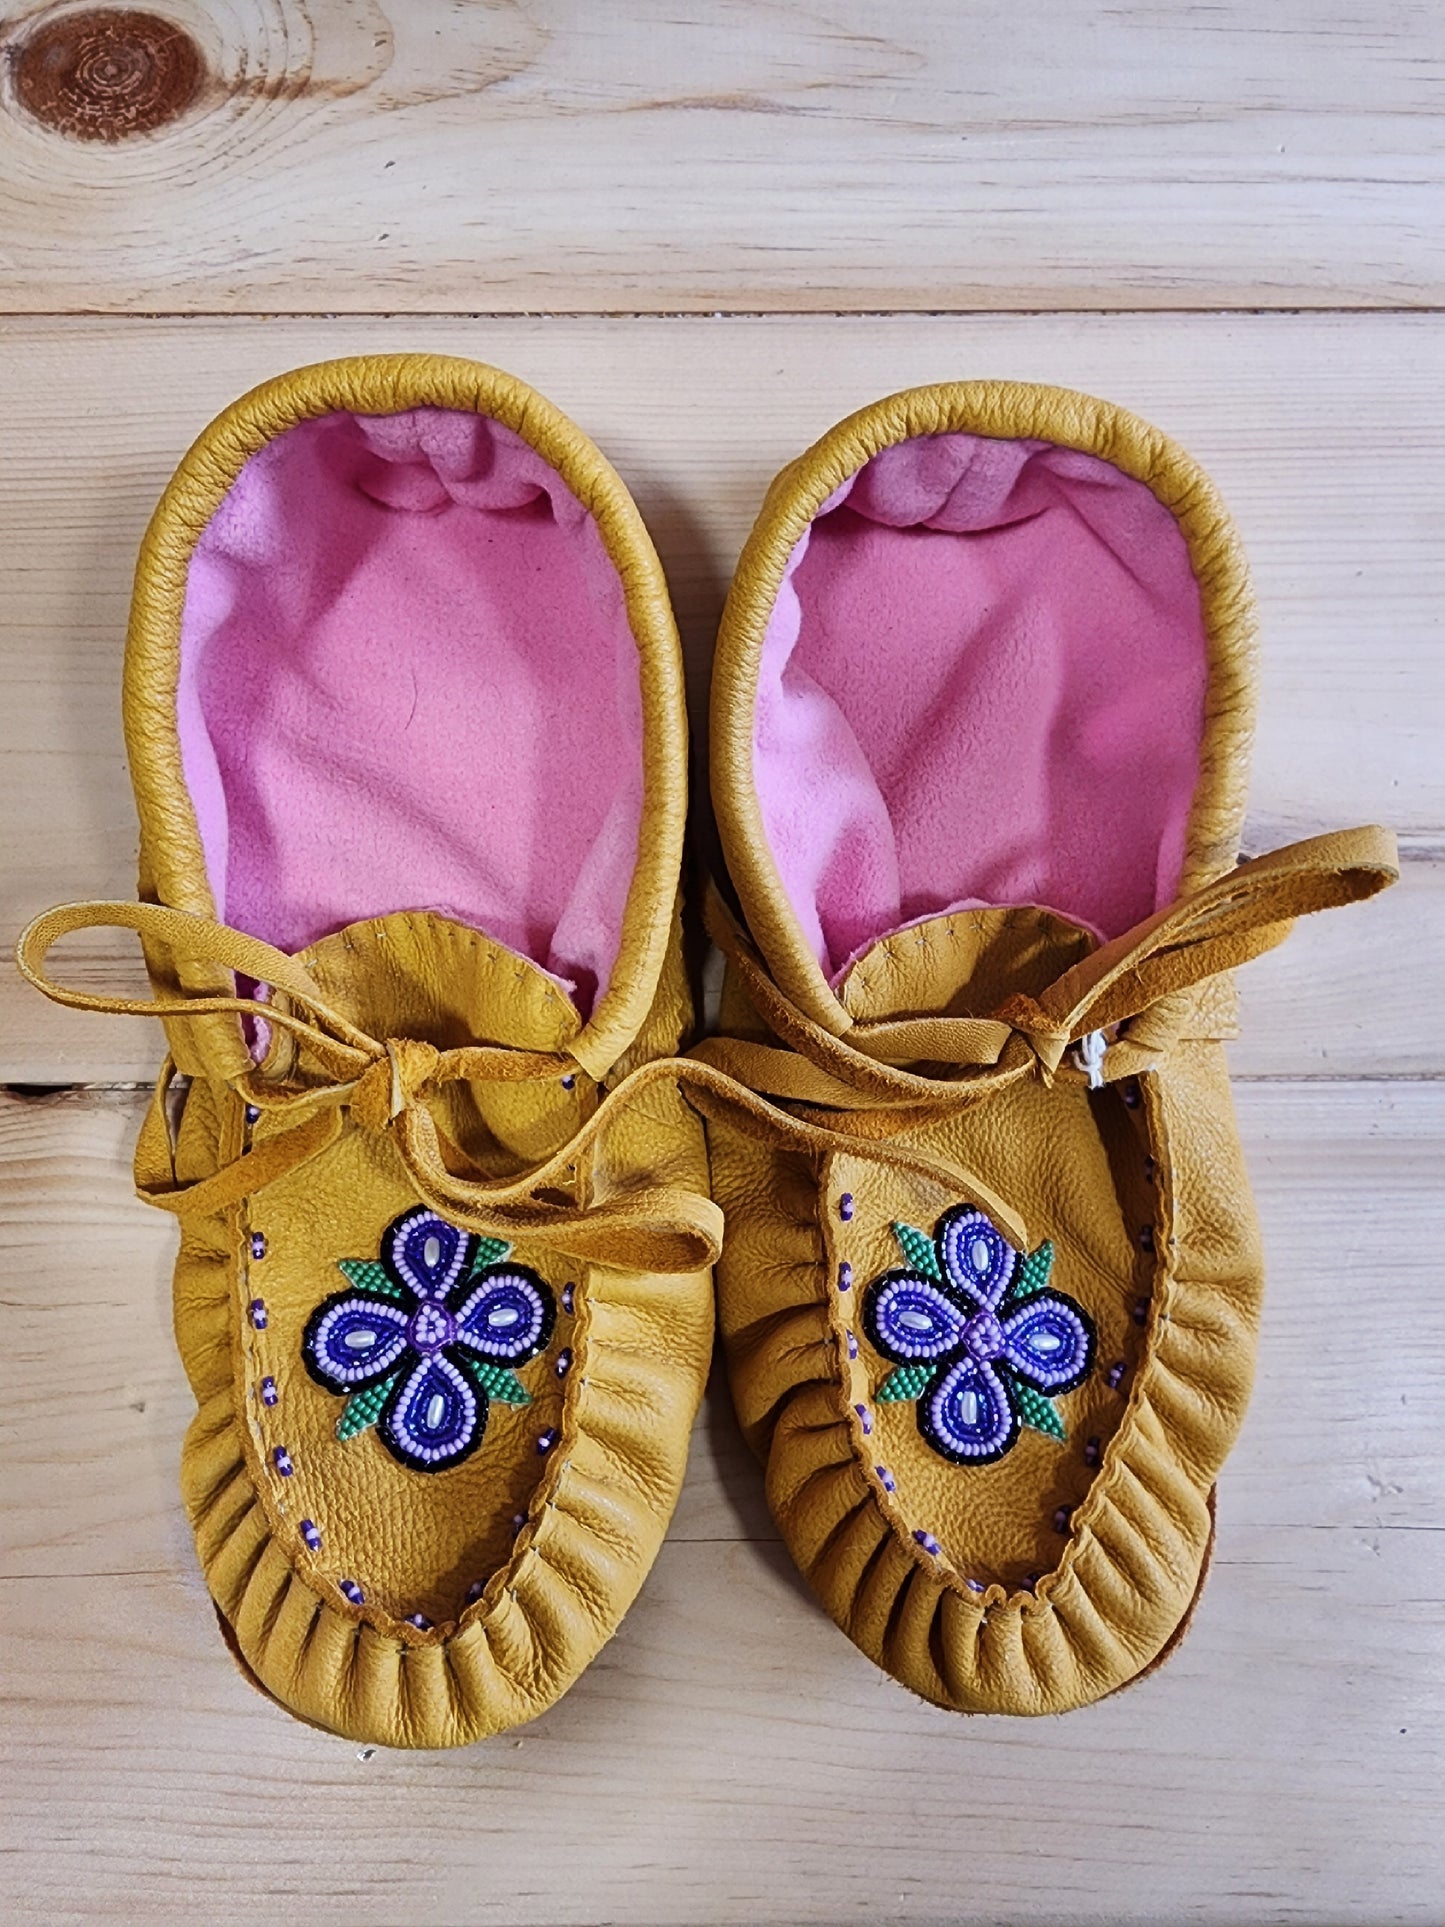 Leather Moccasins - size 9 (U.S.) - with Beaded Flower Design